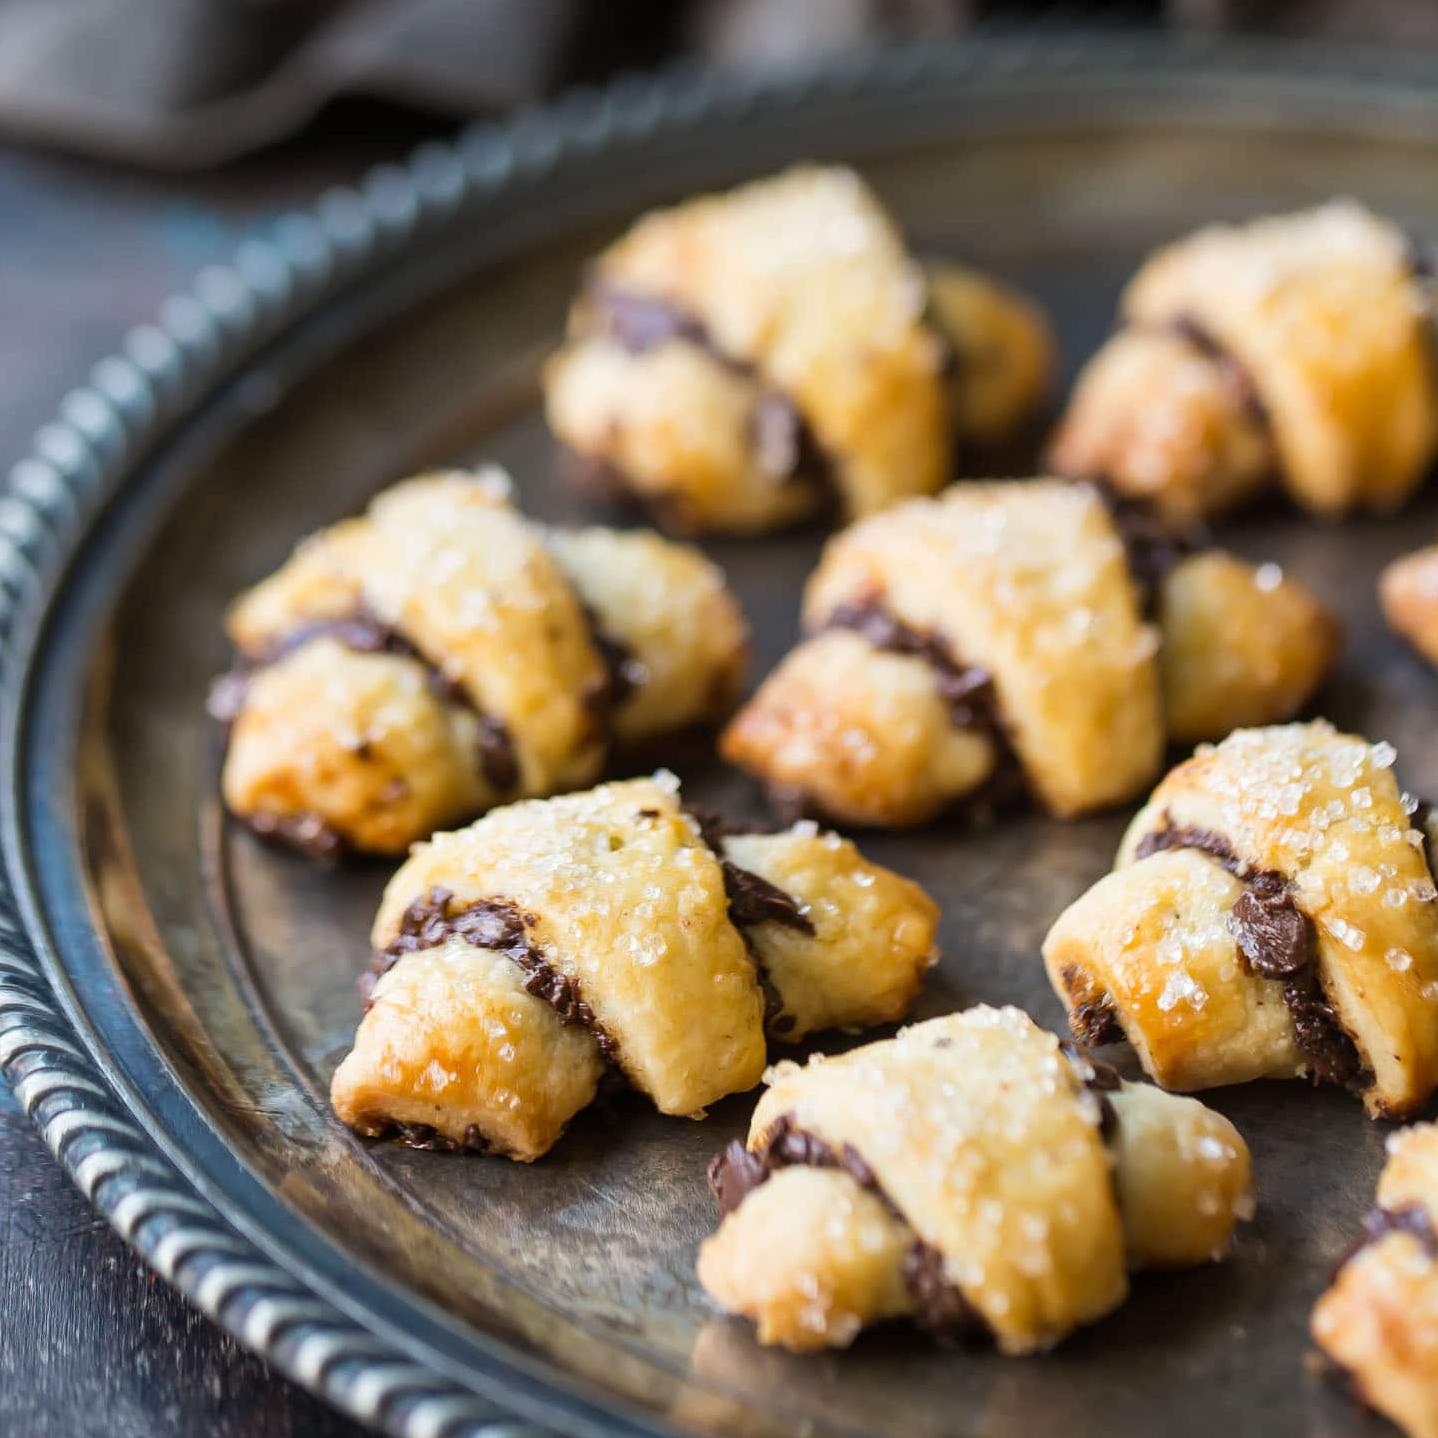  The perfect balance of sweet and rich flavors, one bite of these mini rugelach will leave you craving for more.